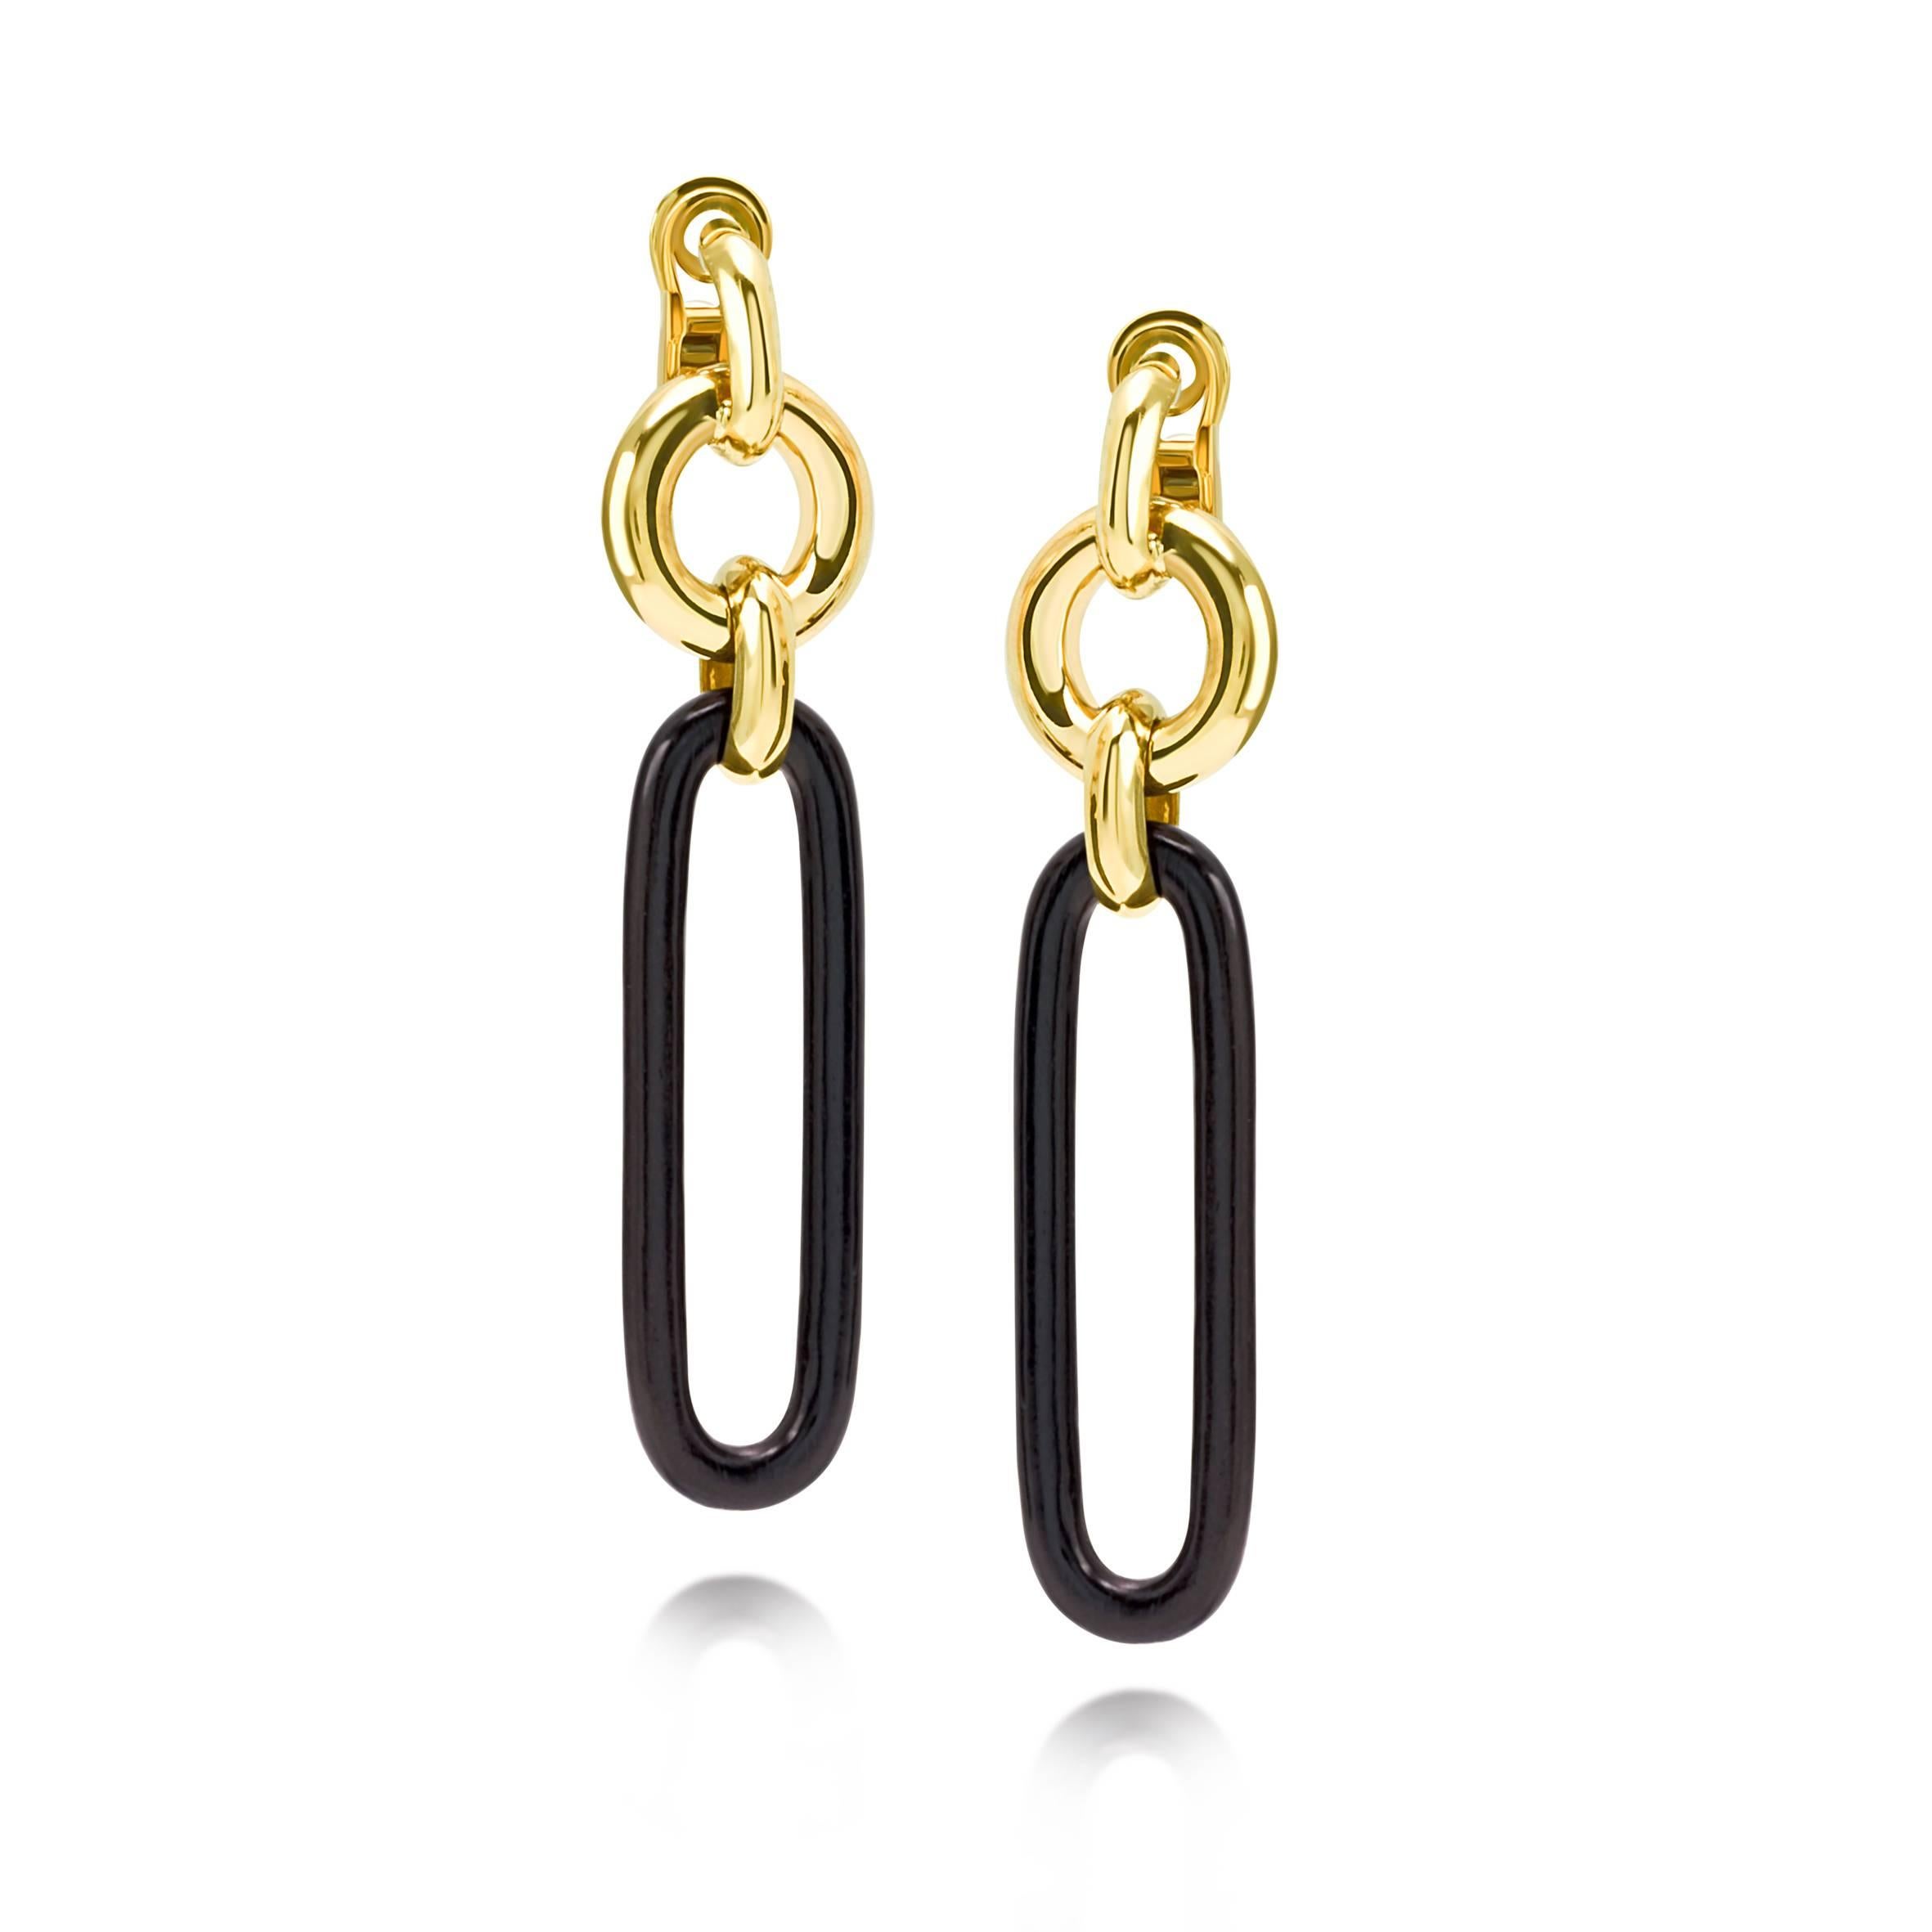 Wood ebony  pair of earrings in 18 kt yellow gold 
The ebony wood is the most elegant wood and even the most precious.

the total weight of the gold is 11.00

STAMP: 10 MI ITALY 750

The full set is available.
